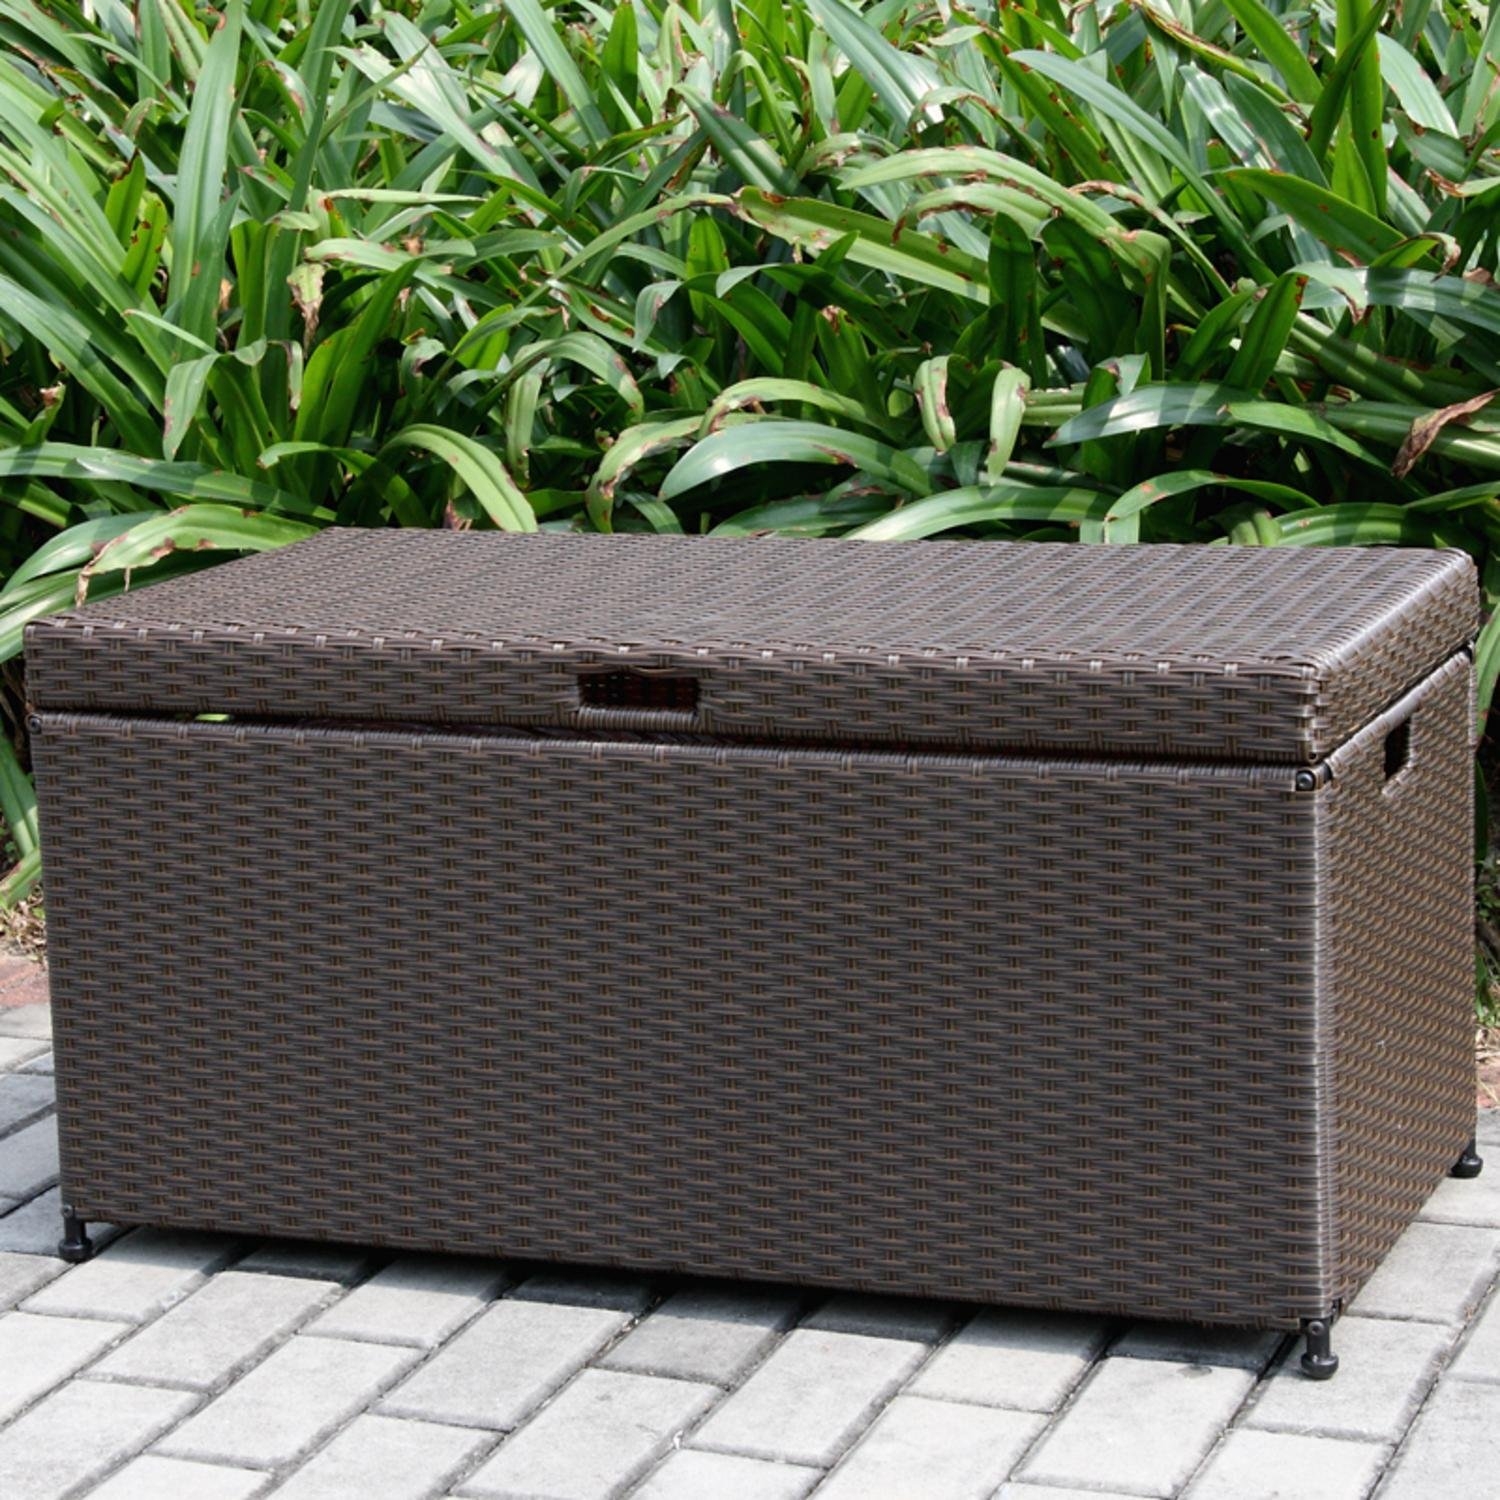 96-Gallon Wicker Patio Deck Box,Outdoor Rattan Storage Container Deck Boxes for Patio Cushions,Gardening Tools 